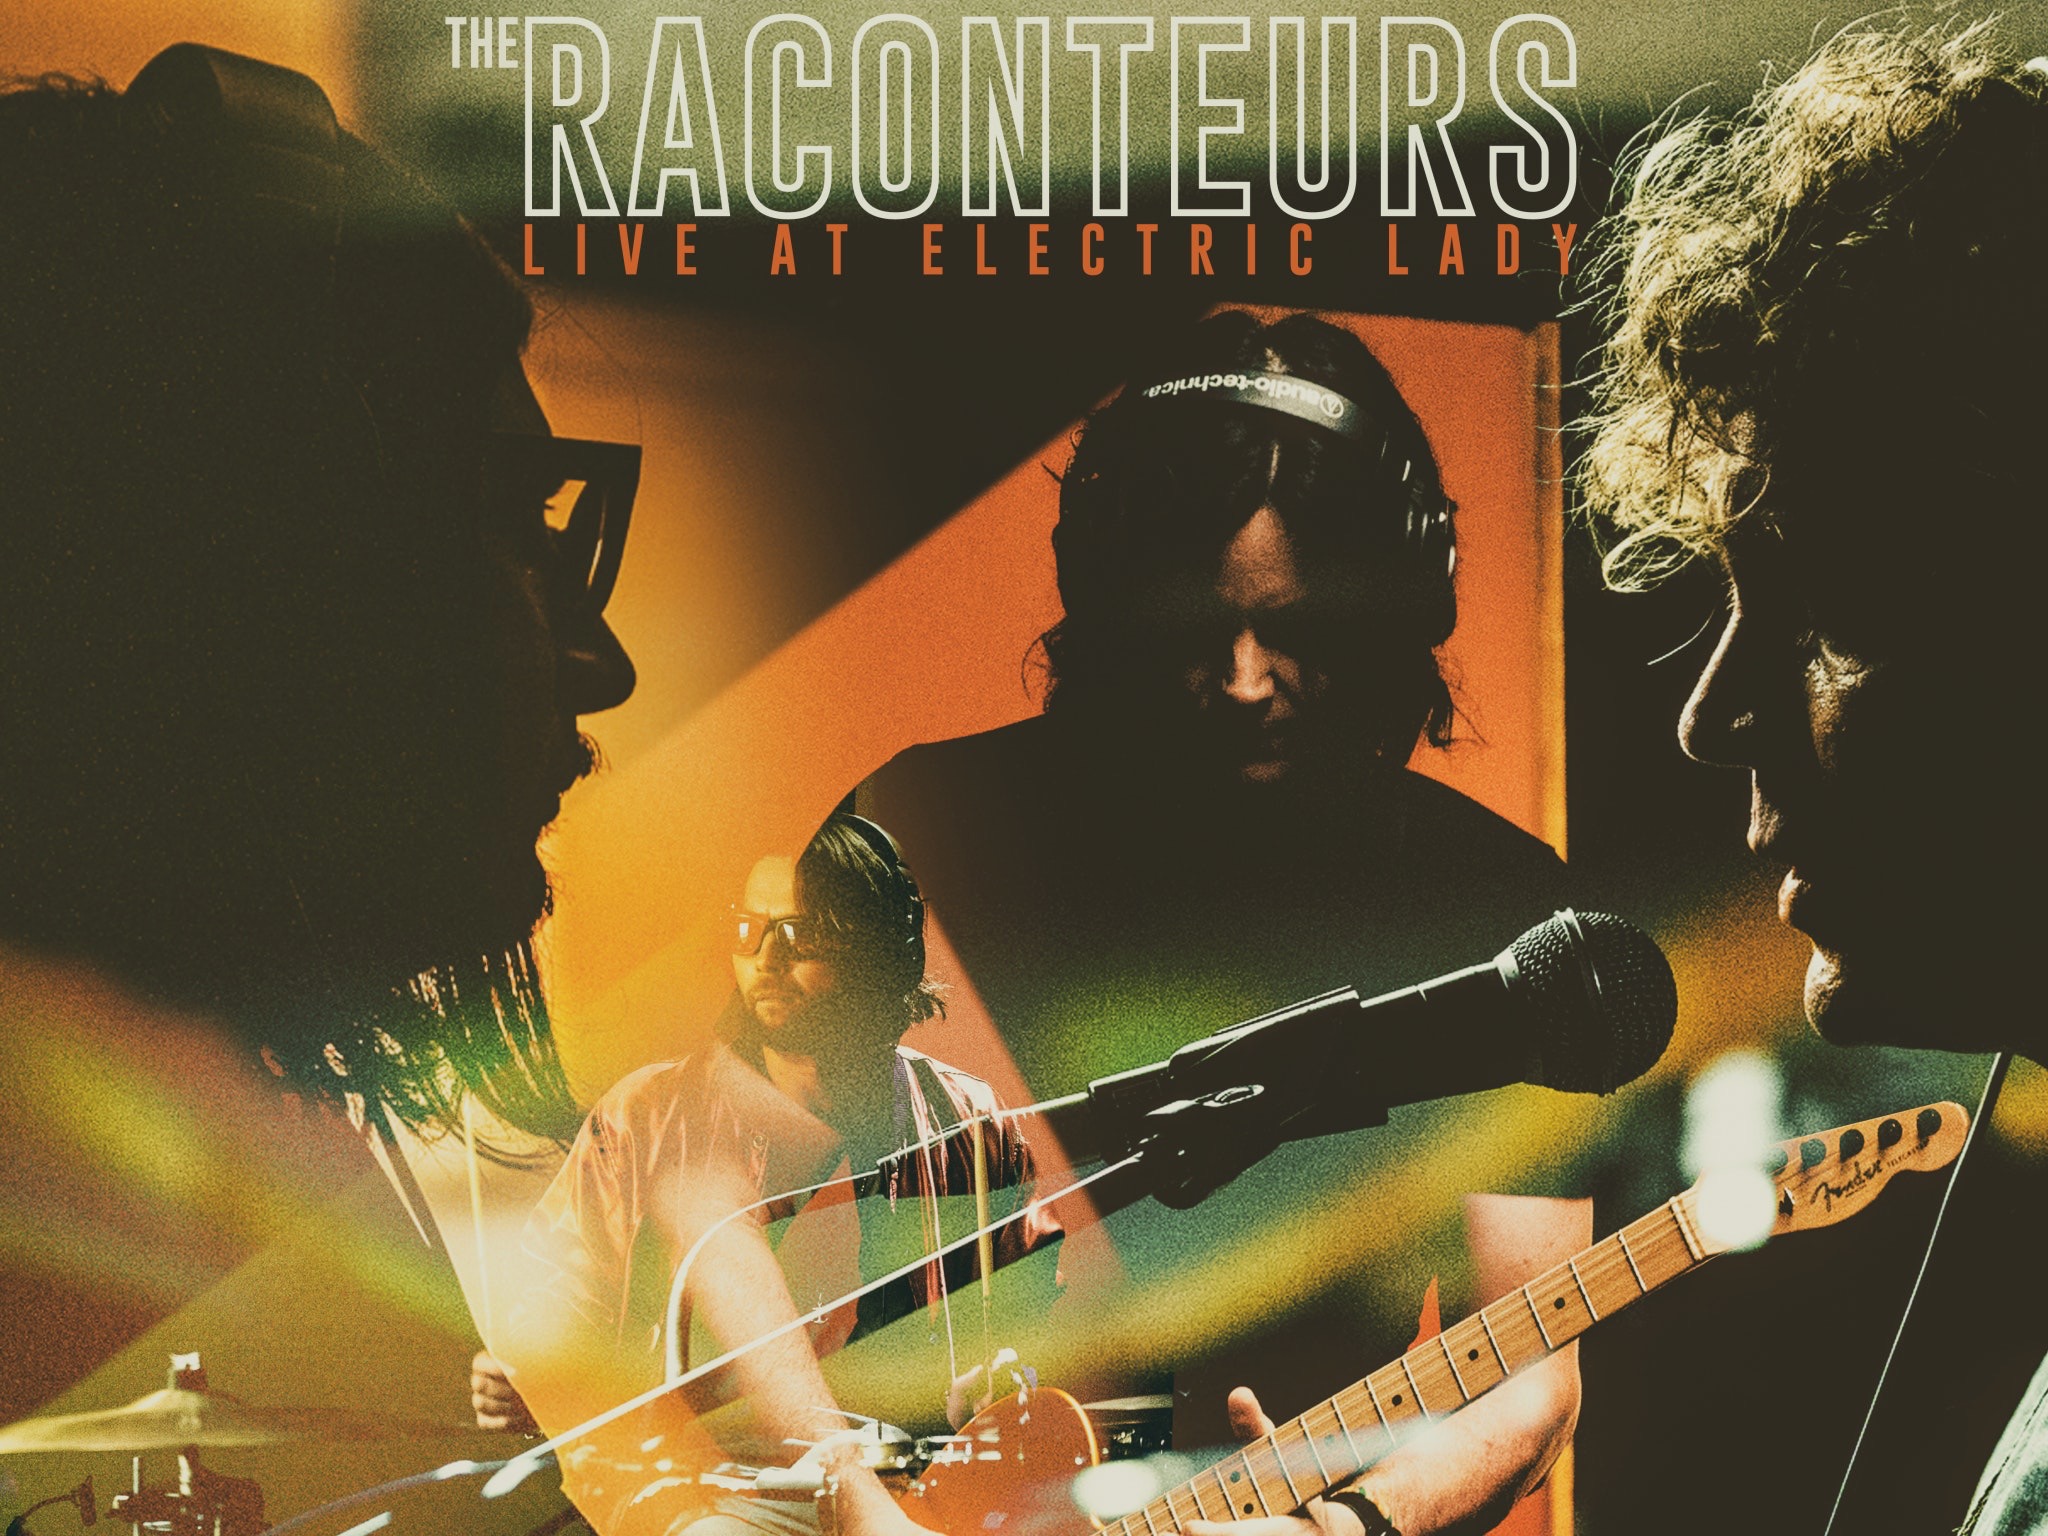 Watch The Raconteurs Storm Through A Raucous Set At Electric Lady Studios Spotify Session